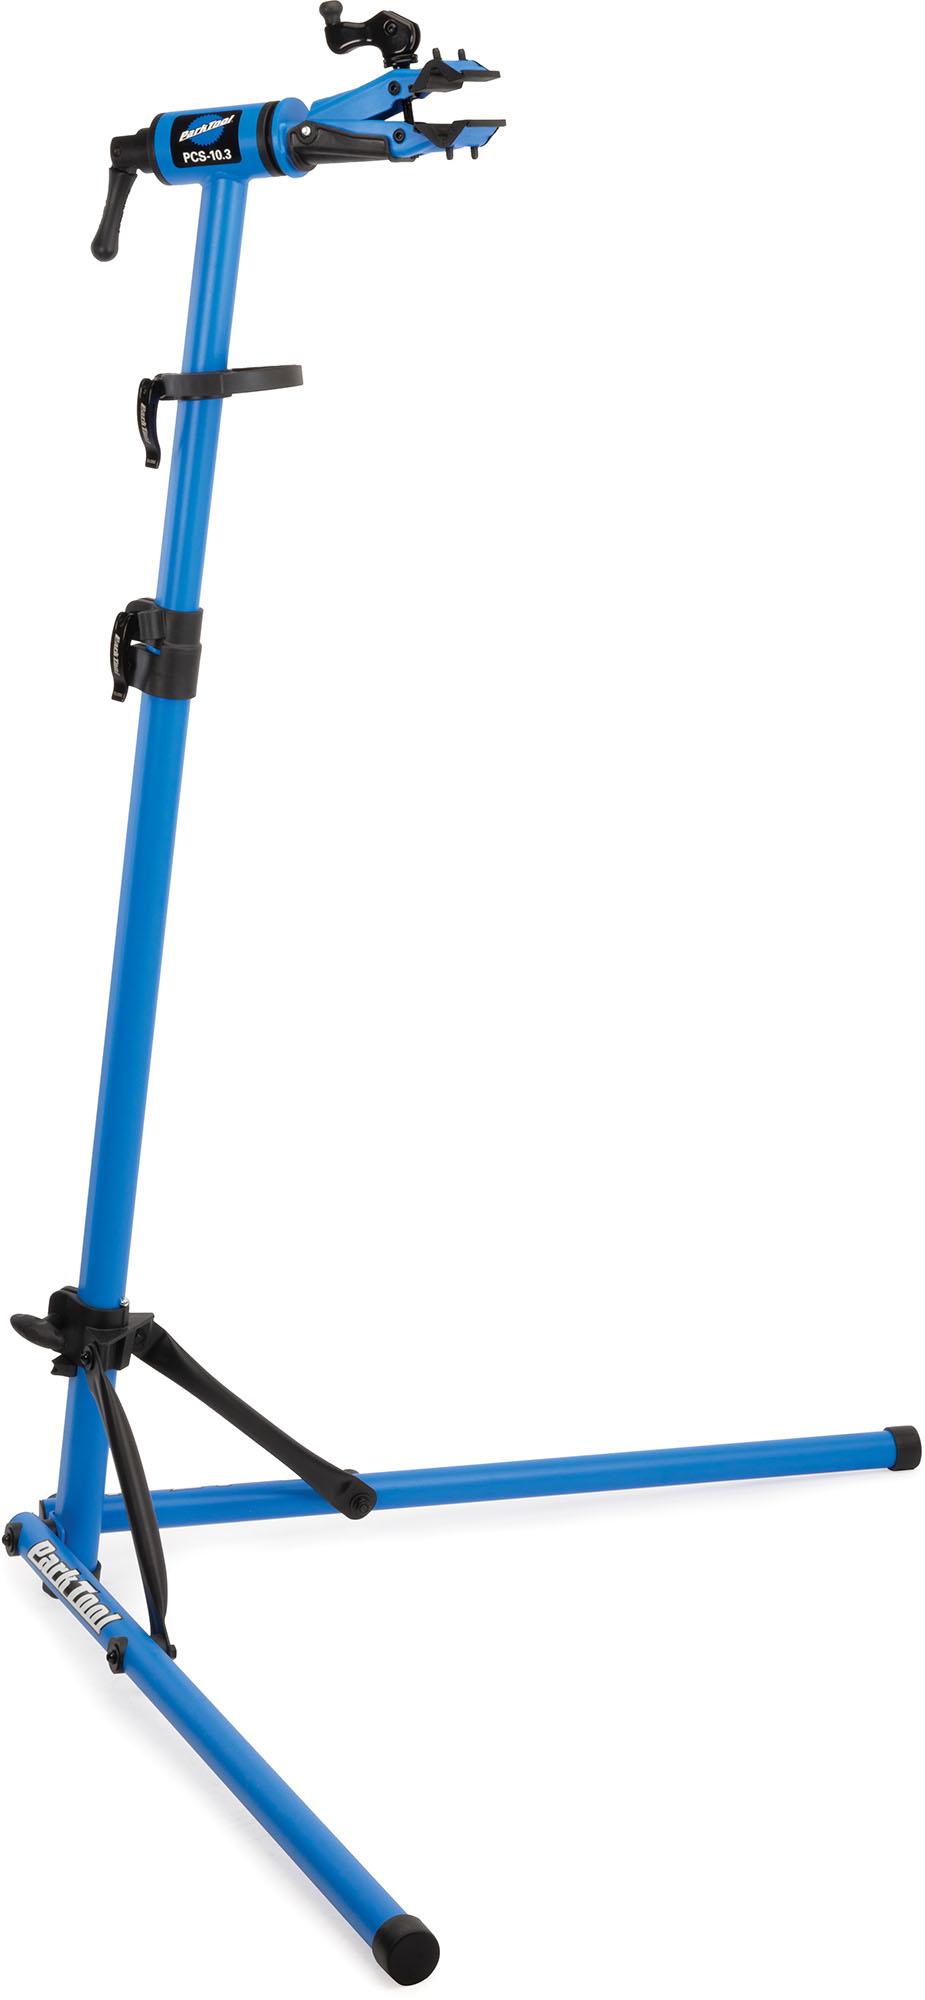 Park Tool Home Mechanic Deluxe Workstand Pcs10.3 - Blue